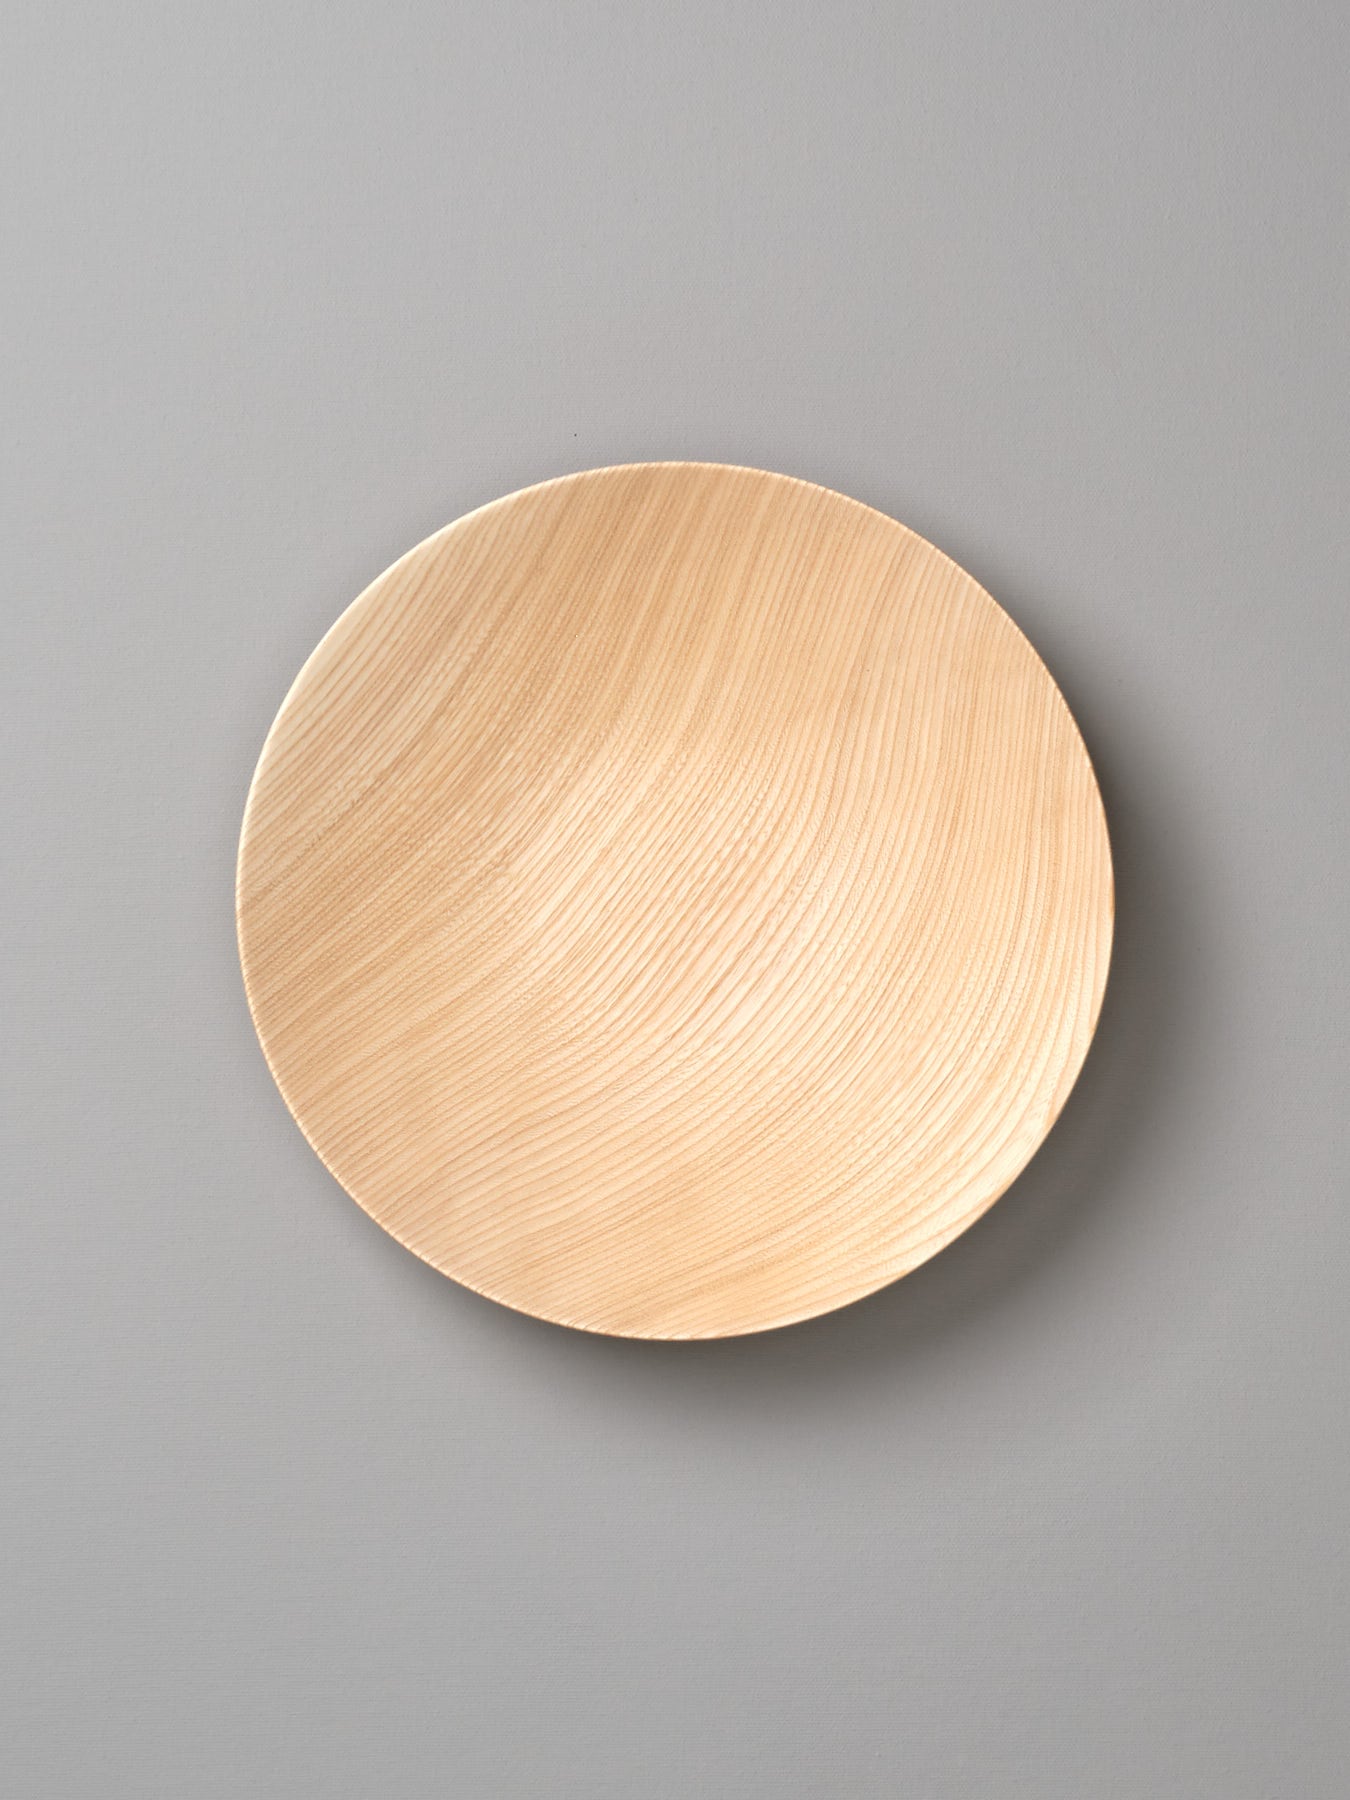 A Kihachi Wooden Plate - Medium on a gray background.